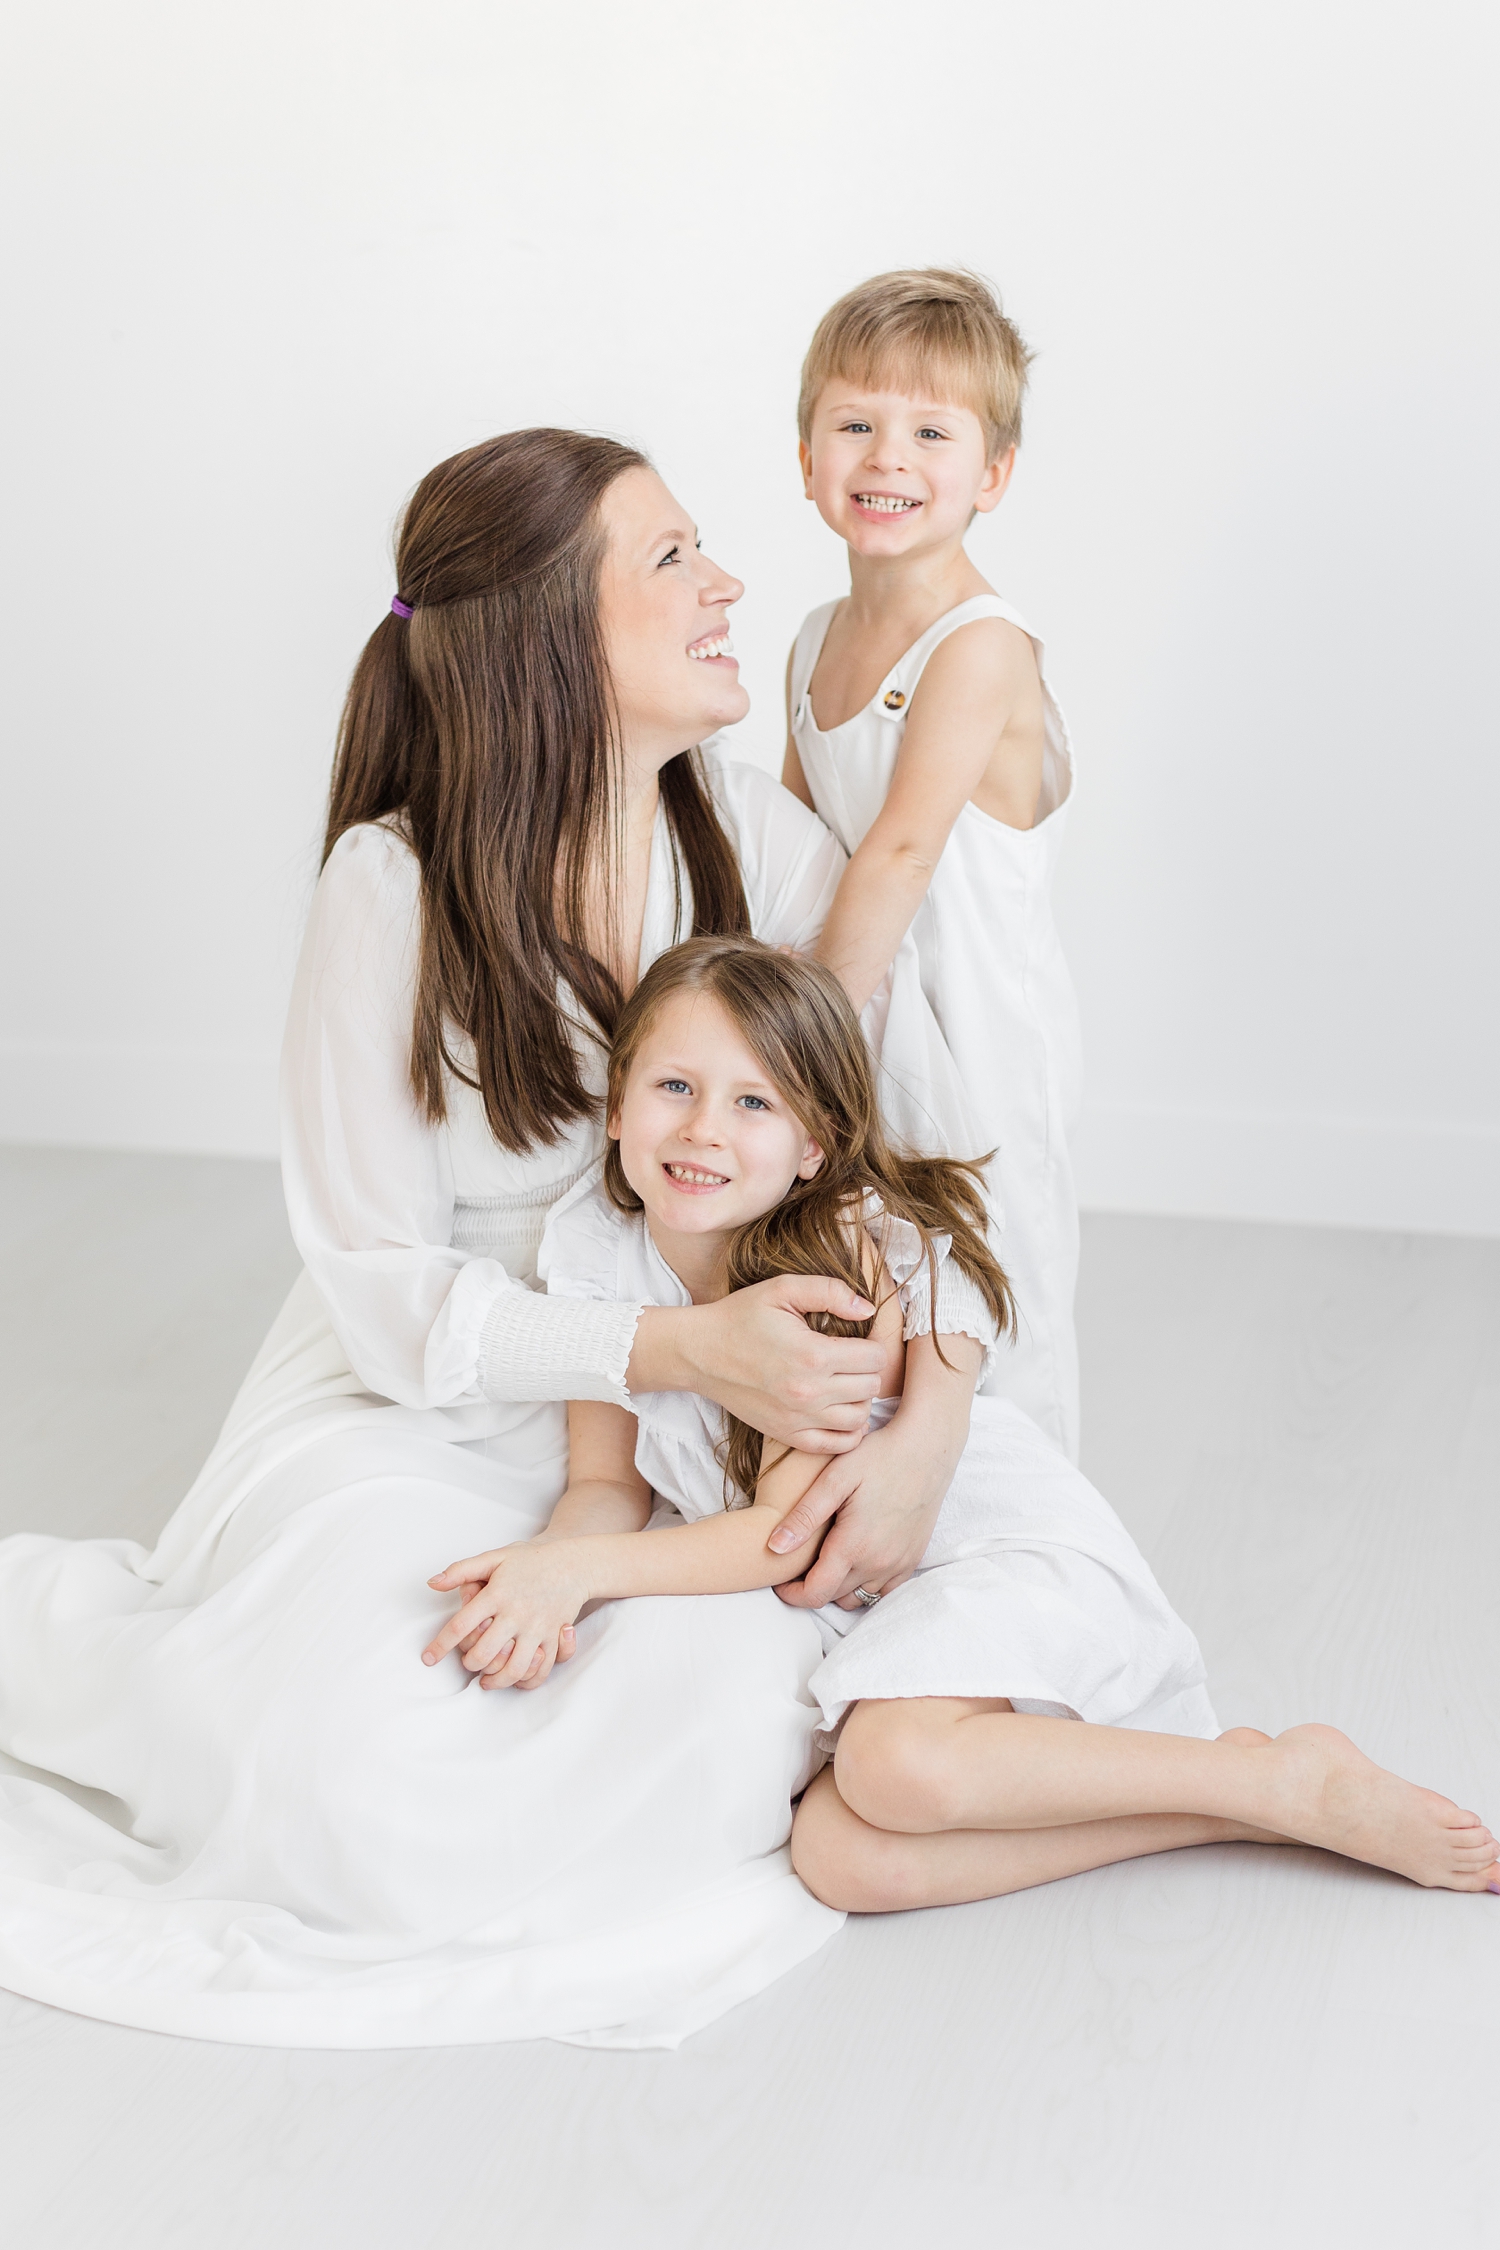 Brandee smile at her two children during a signature white studio photography session | CB Studio